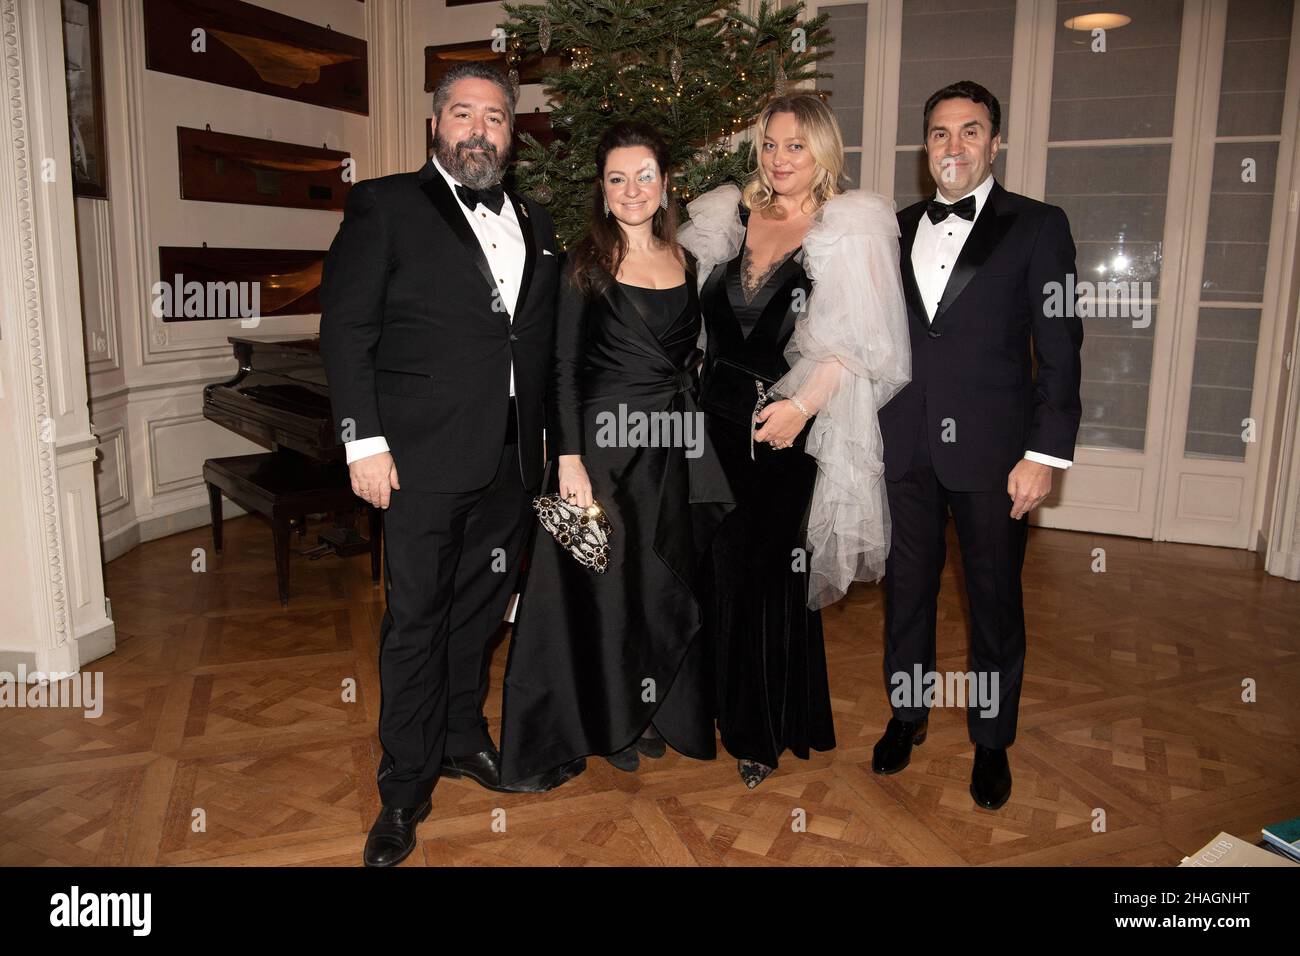 Grand Duke George Mikhailovich of Russia, (Georgi Mikhailovich Romanov), Princess Victoria Romanovna, Oxana Girko and her husband Oleg Novachuk attend the dinner organized by the Assembly of the Russian Nobility in France (A.N.R.F), President Prince Stephane Belosselsky at the Yacth Club de France, on December 10, 2021 in Paris, France. Photo by David Niviere/ABACAPRESS.COM Stock Photo